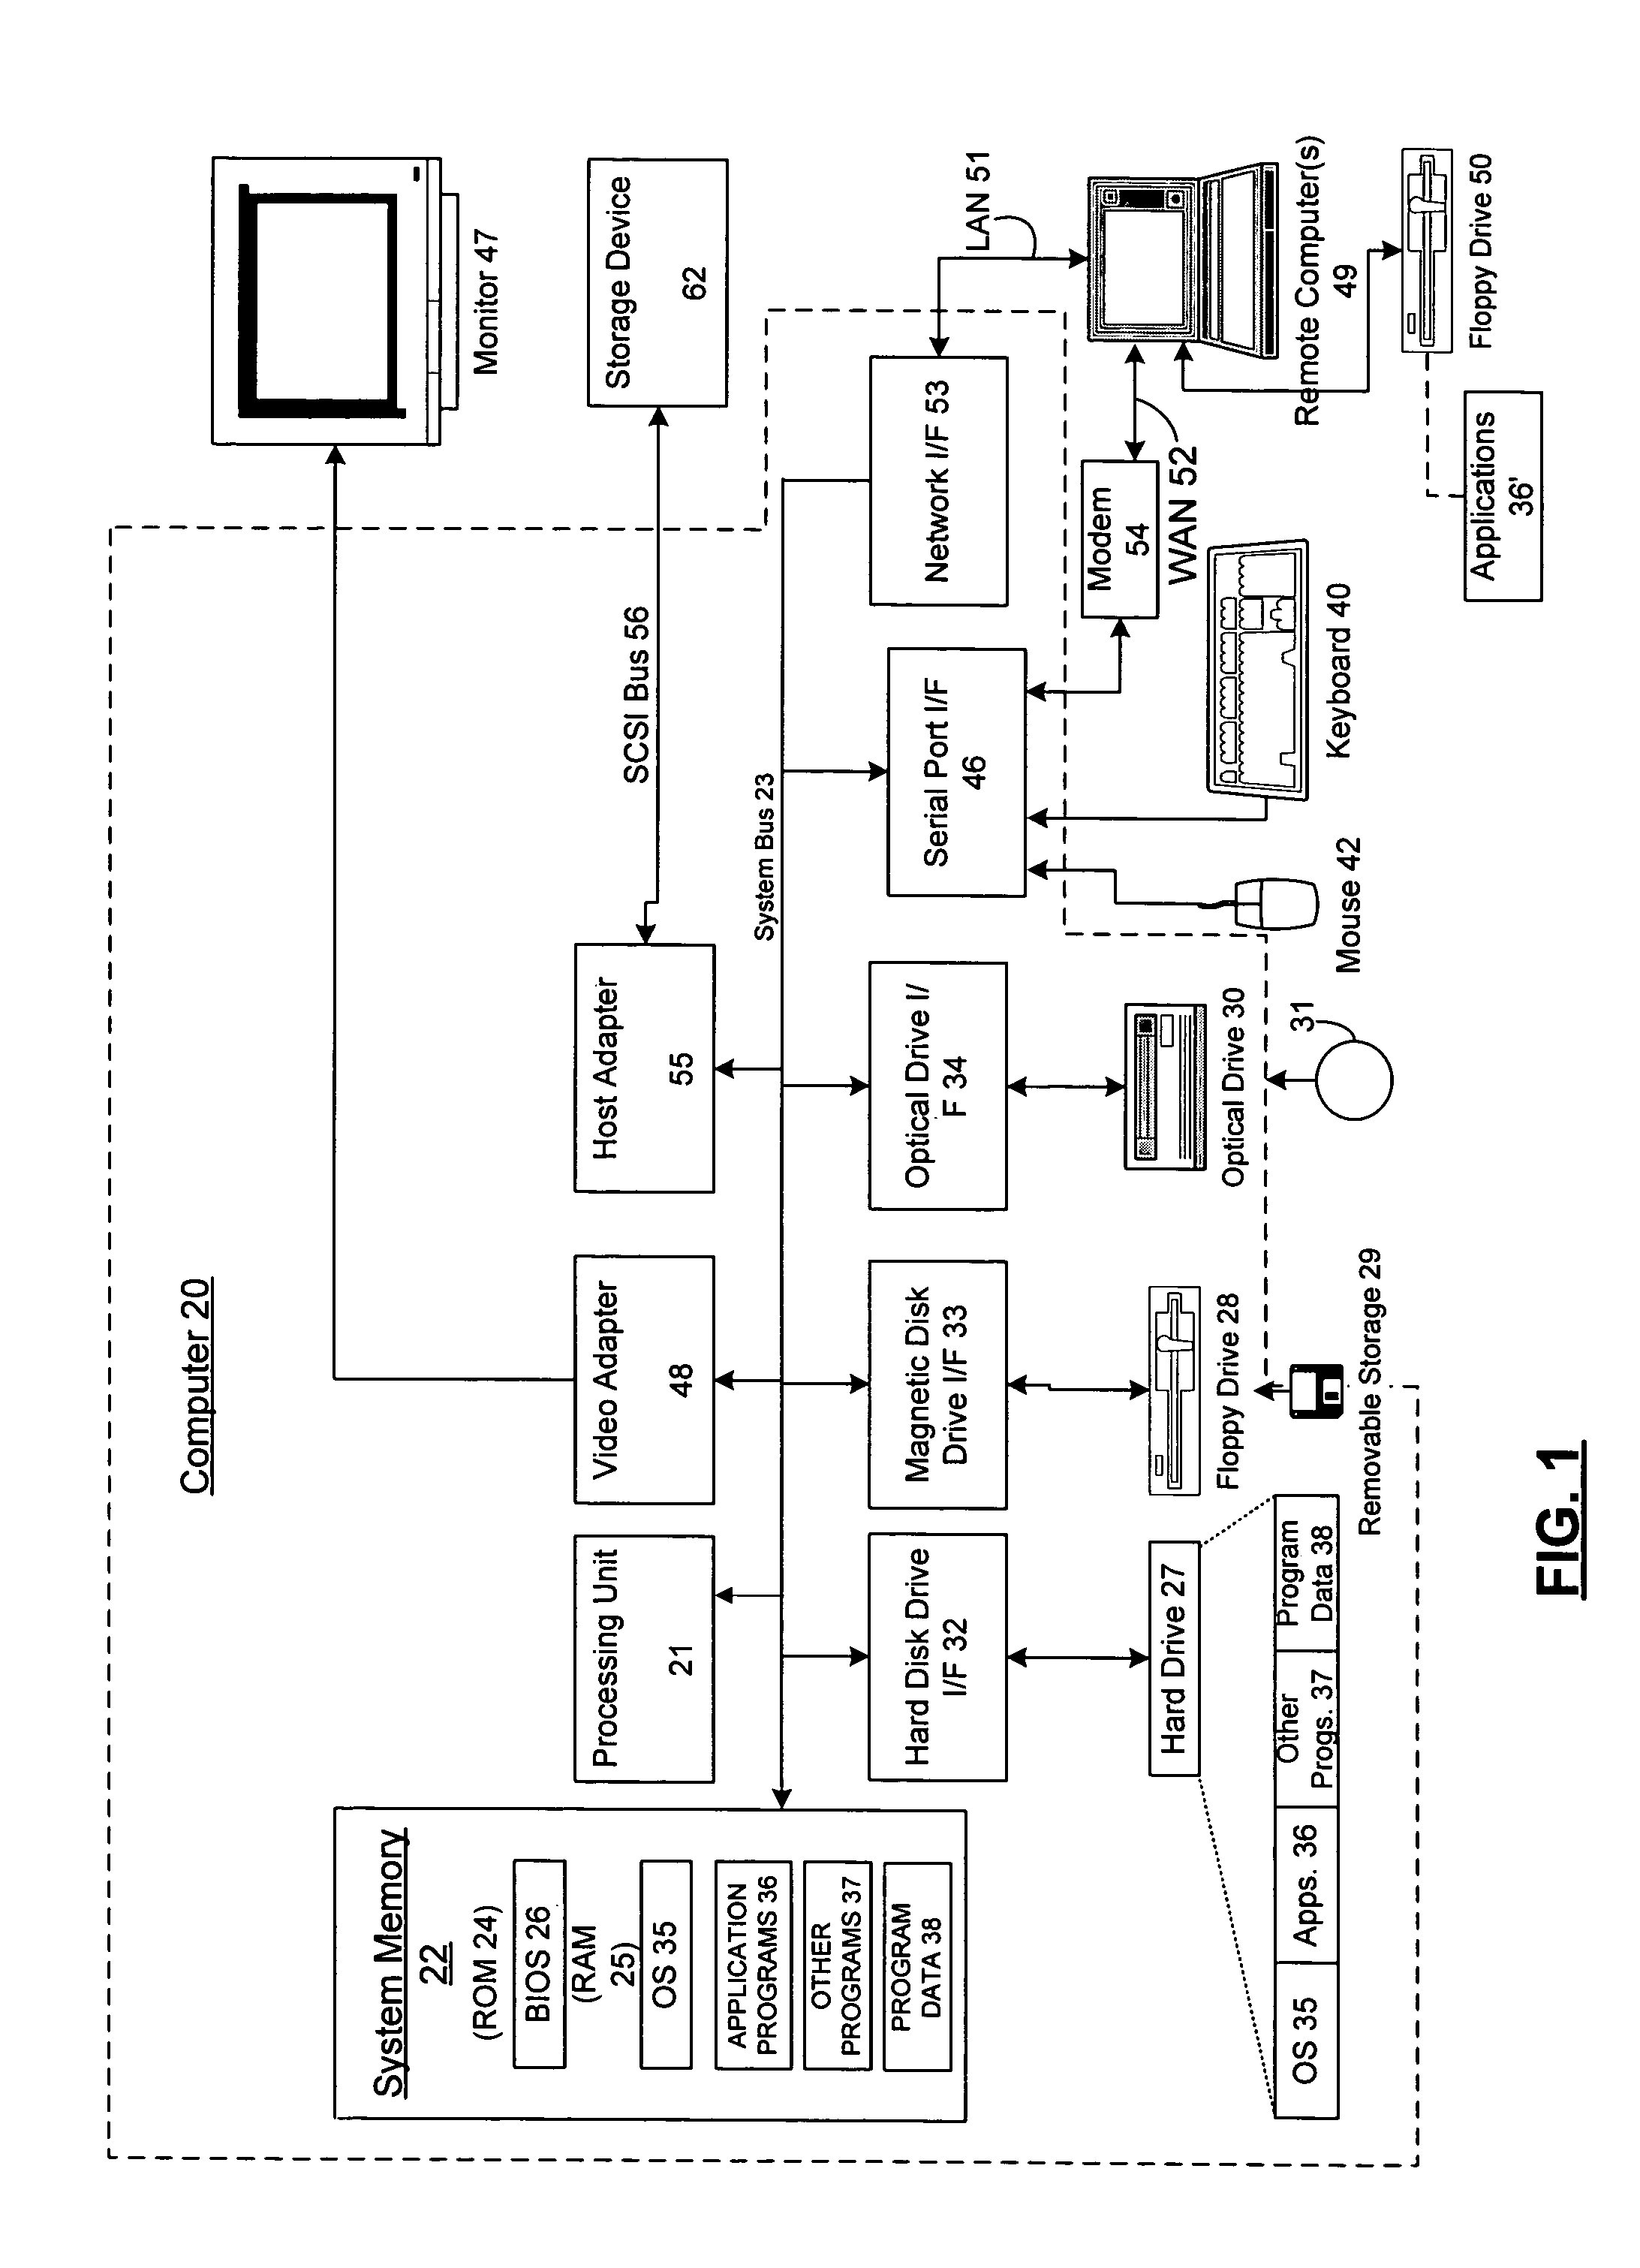 Systems and methods for data encryption using plugins within virtual systems and subsystems